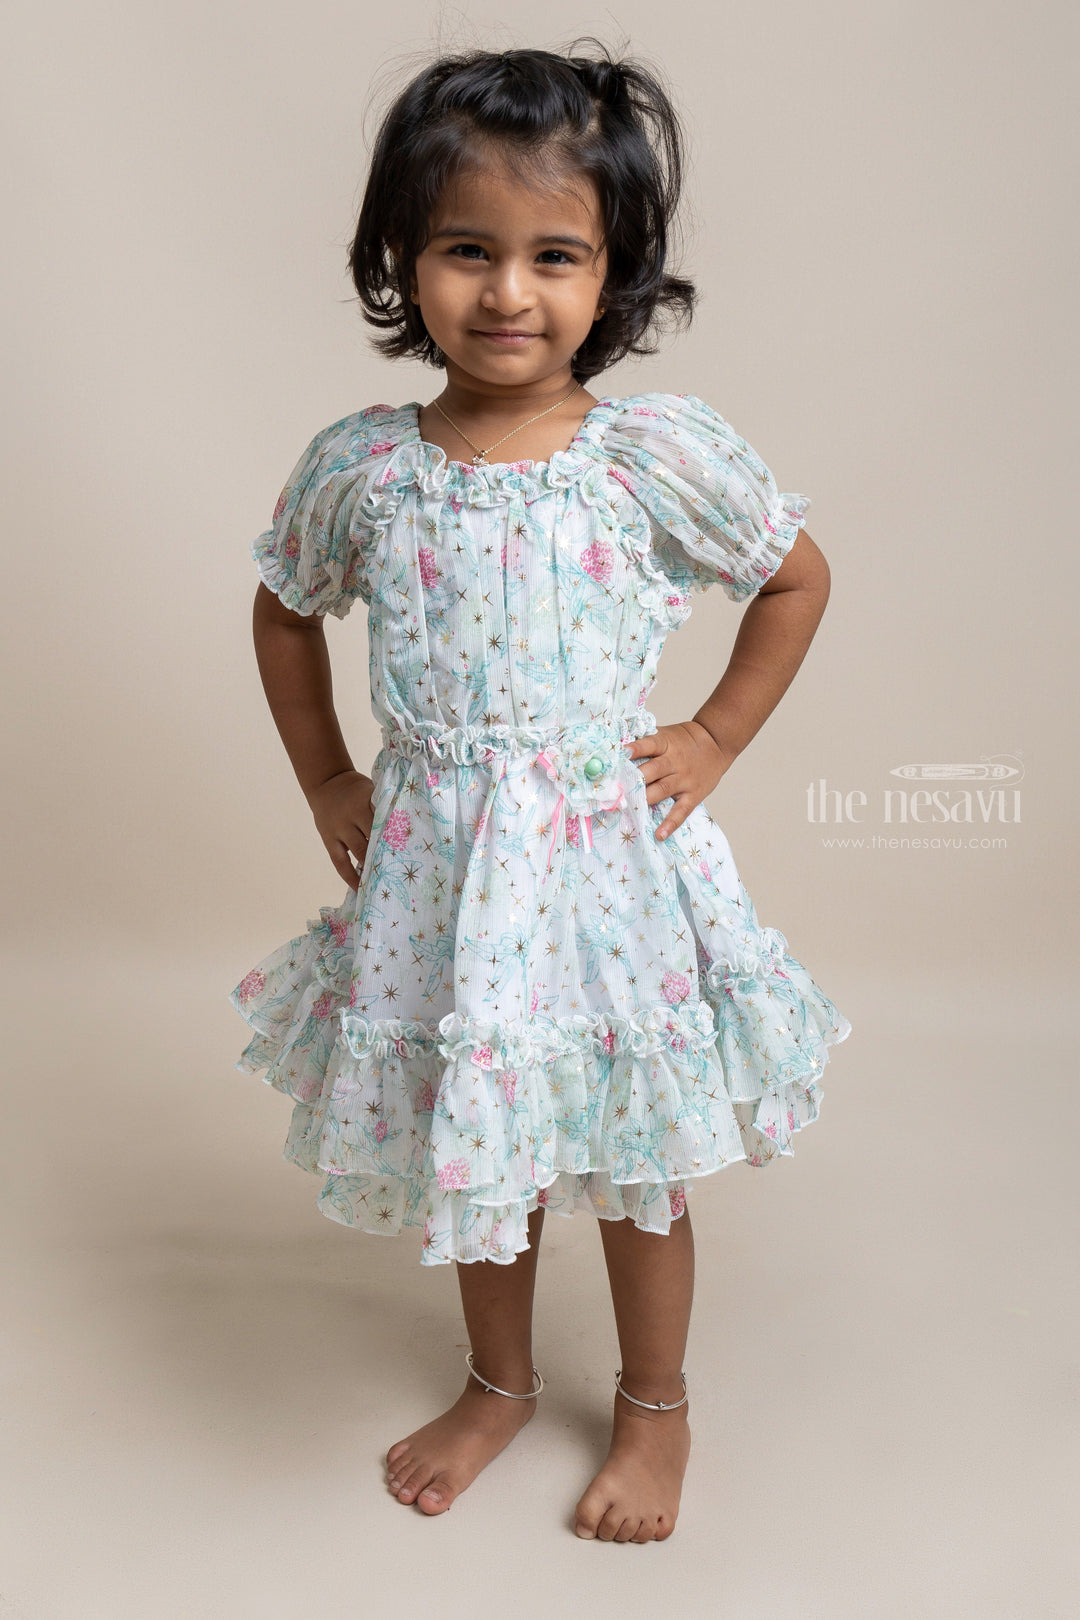 The Nesavu Baby Fancy Frock Eye-catching Green Floral Printed Ruffled Chiffon Frock for Baby girls Nesavu Floral Designed Baby Frock | New Arrivals For Baby girls | The Nesavu